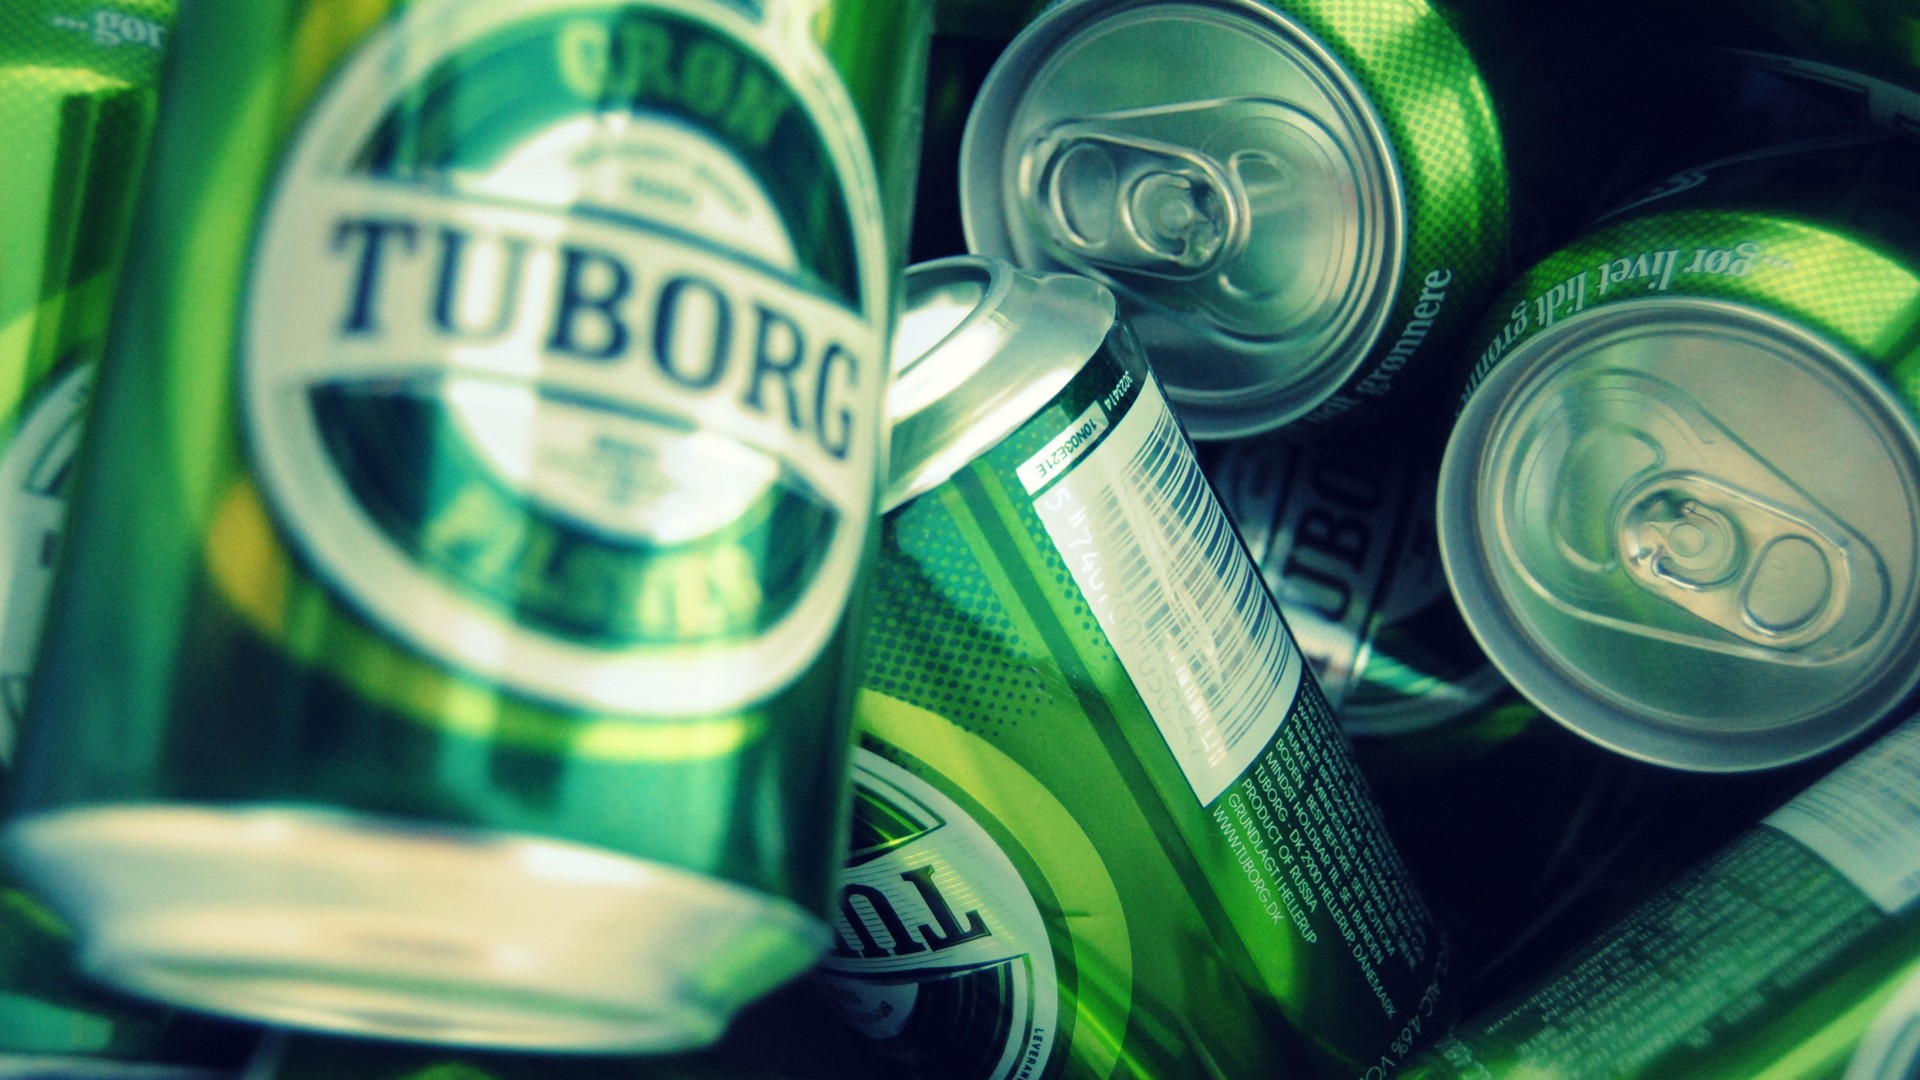 General 1920x1080 beer Danish alcohol green Tuborg (Beer) can